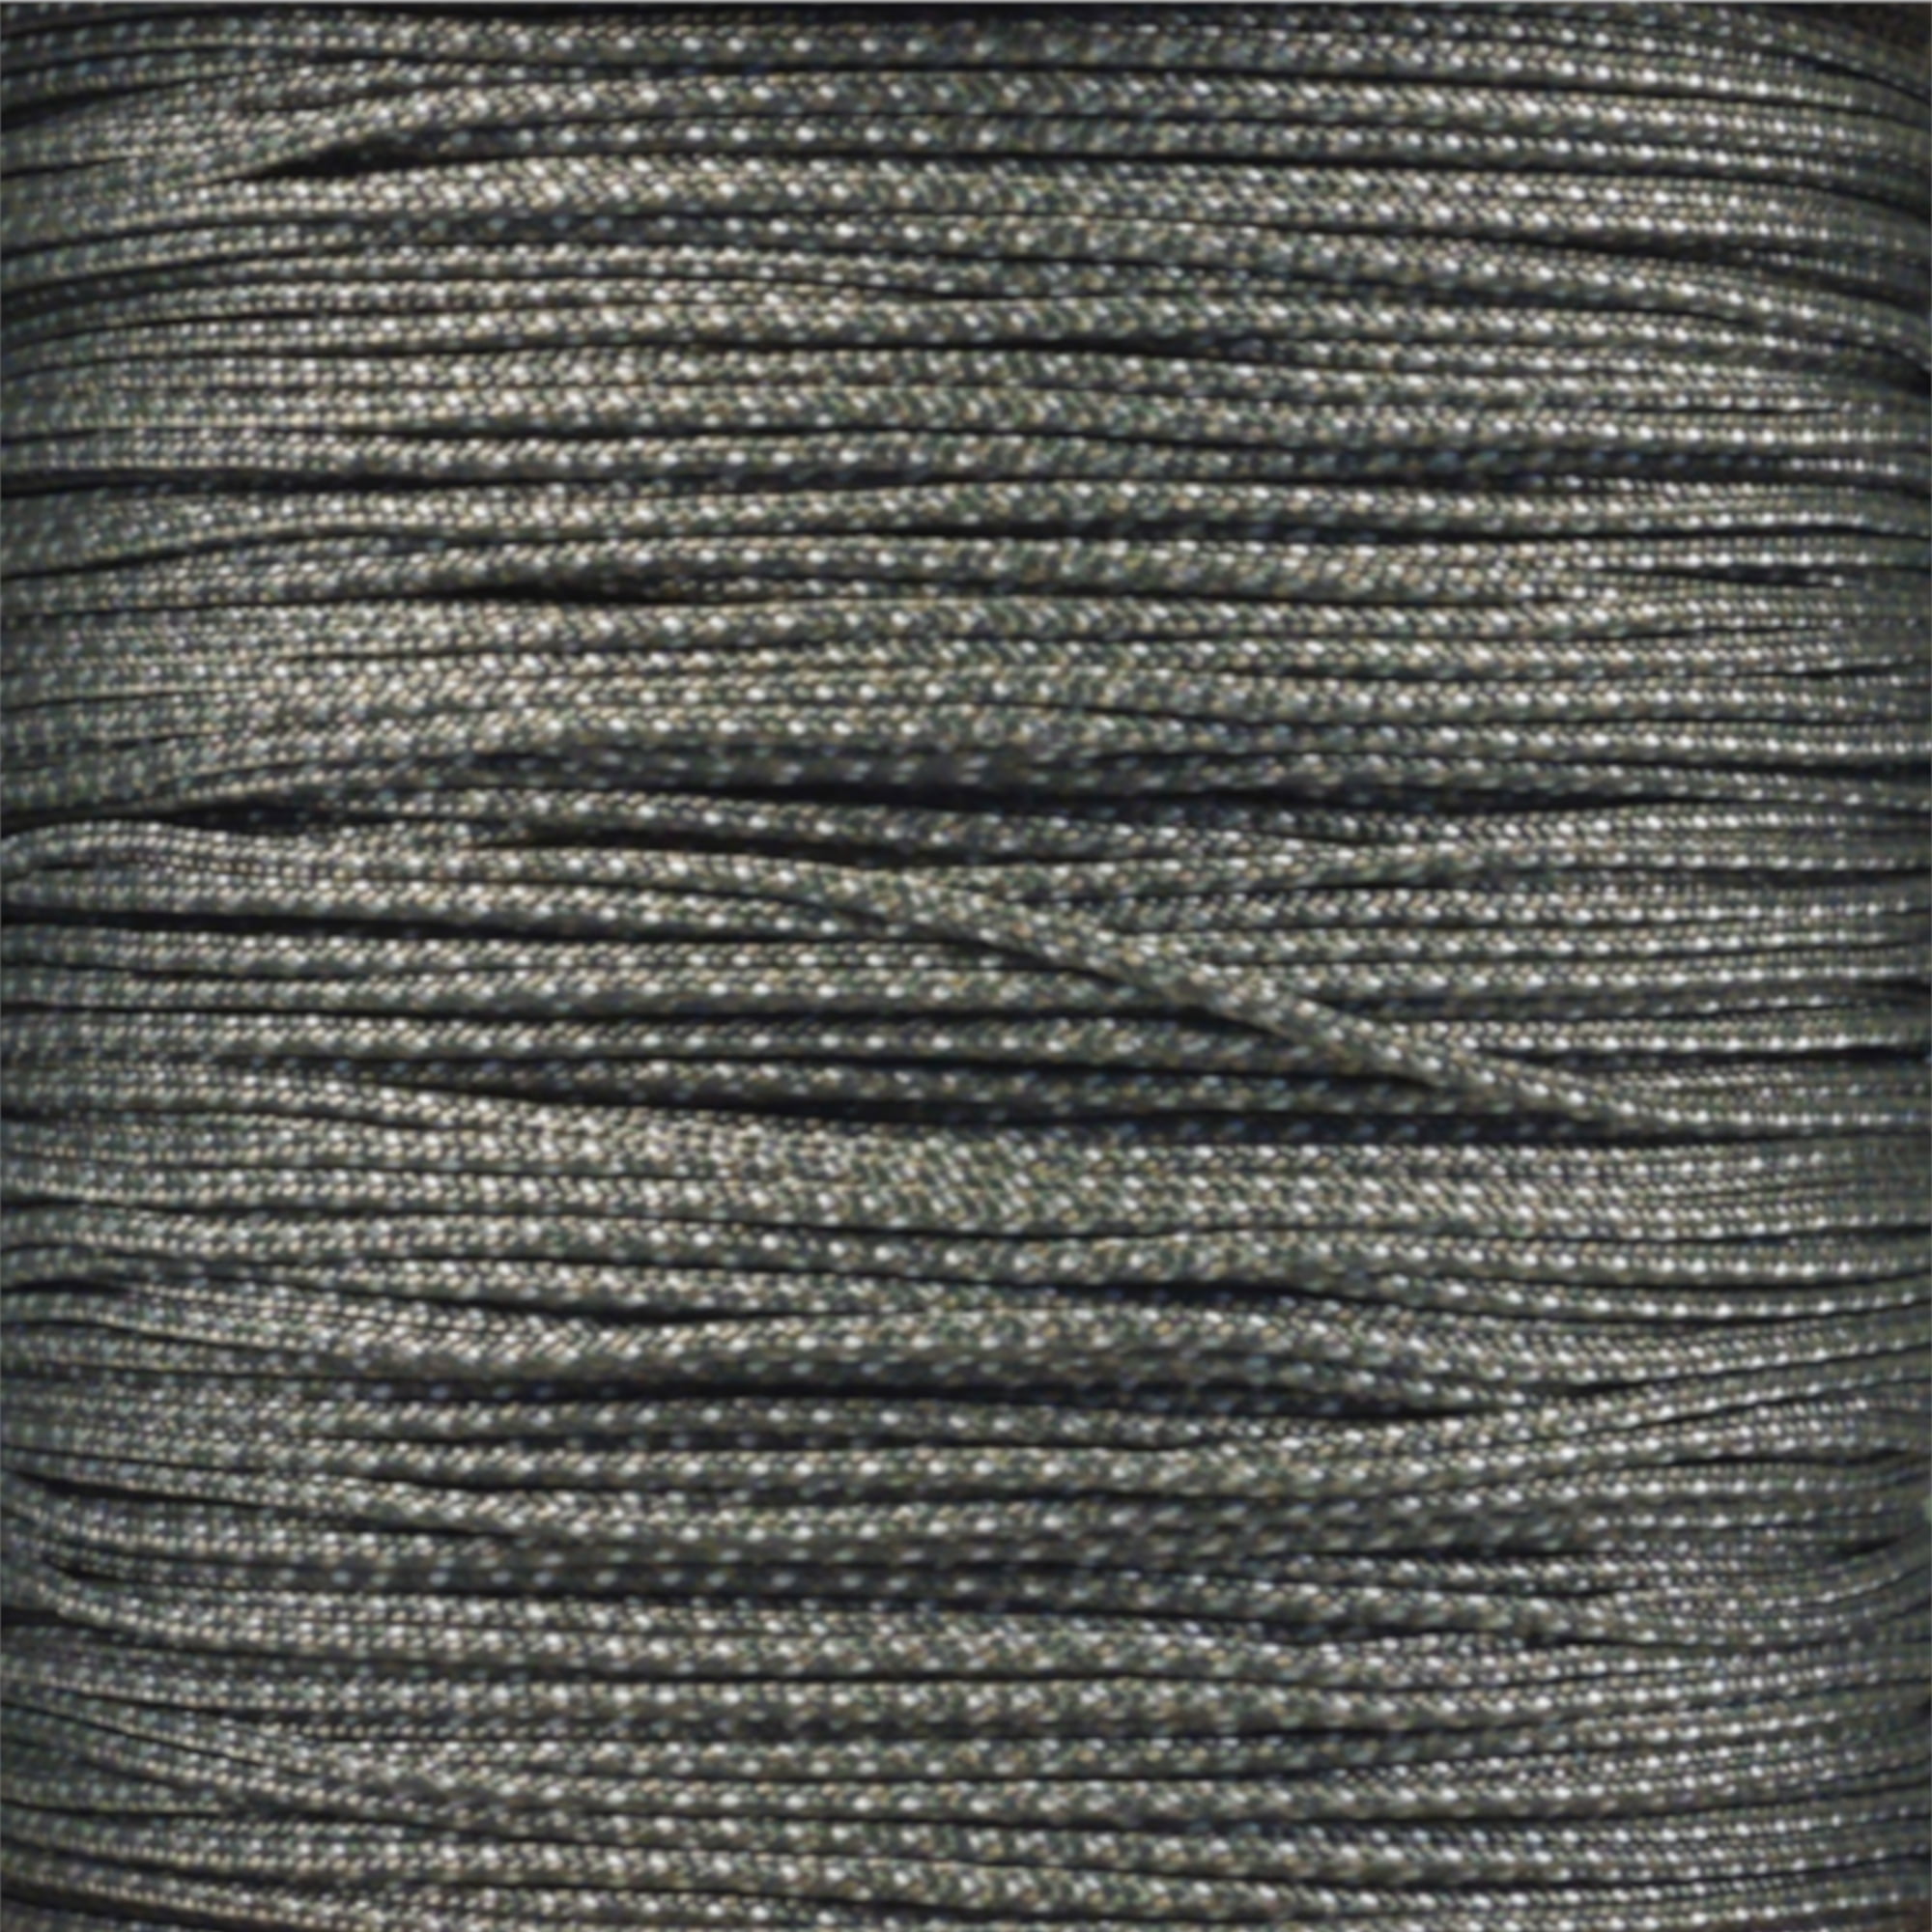 Various Solid Colors 750 and 250 Feet of USA Made Cord 325 Available in Lengths of 10 275 50 25 425 550 PARACORD PLANET 95 and para-Max Paracord 100